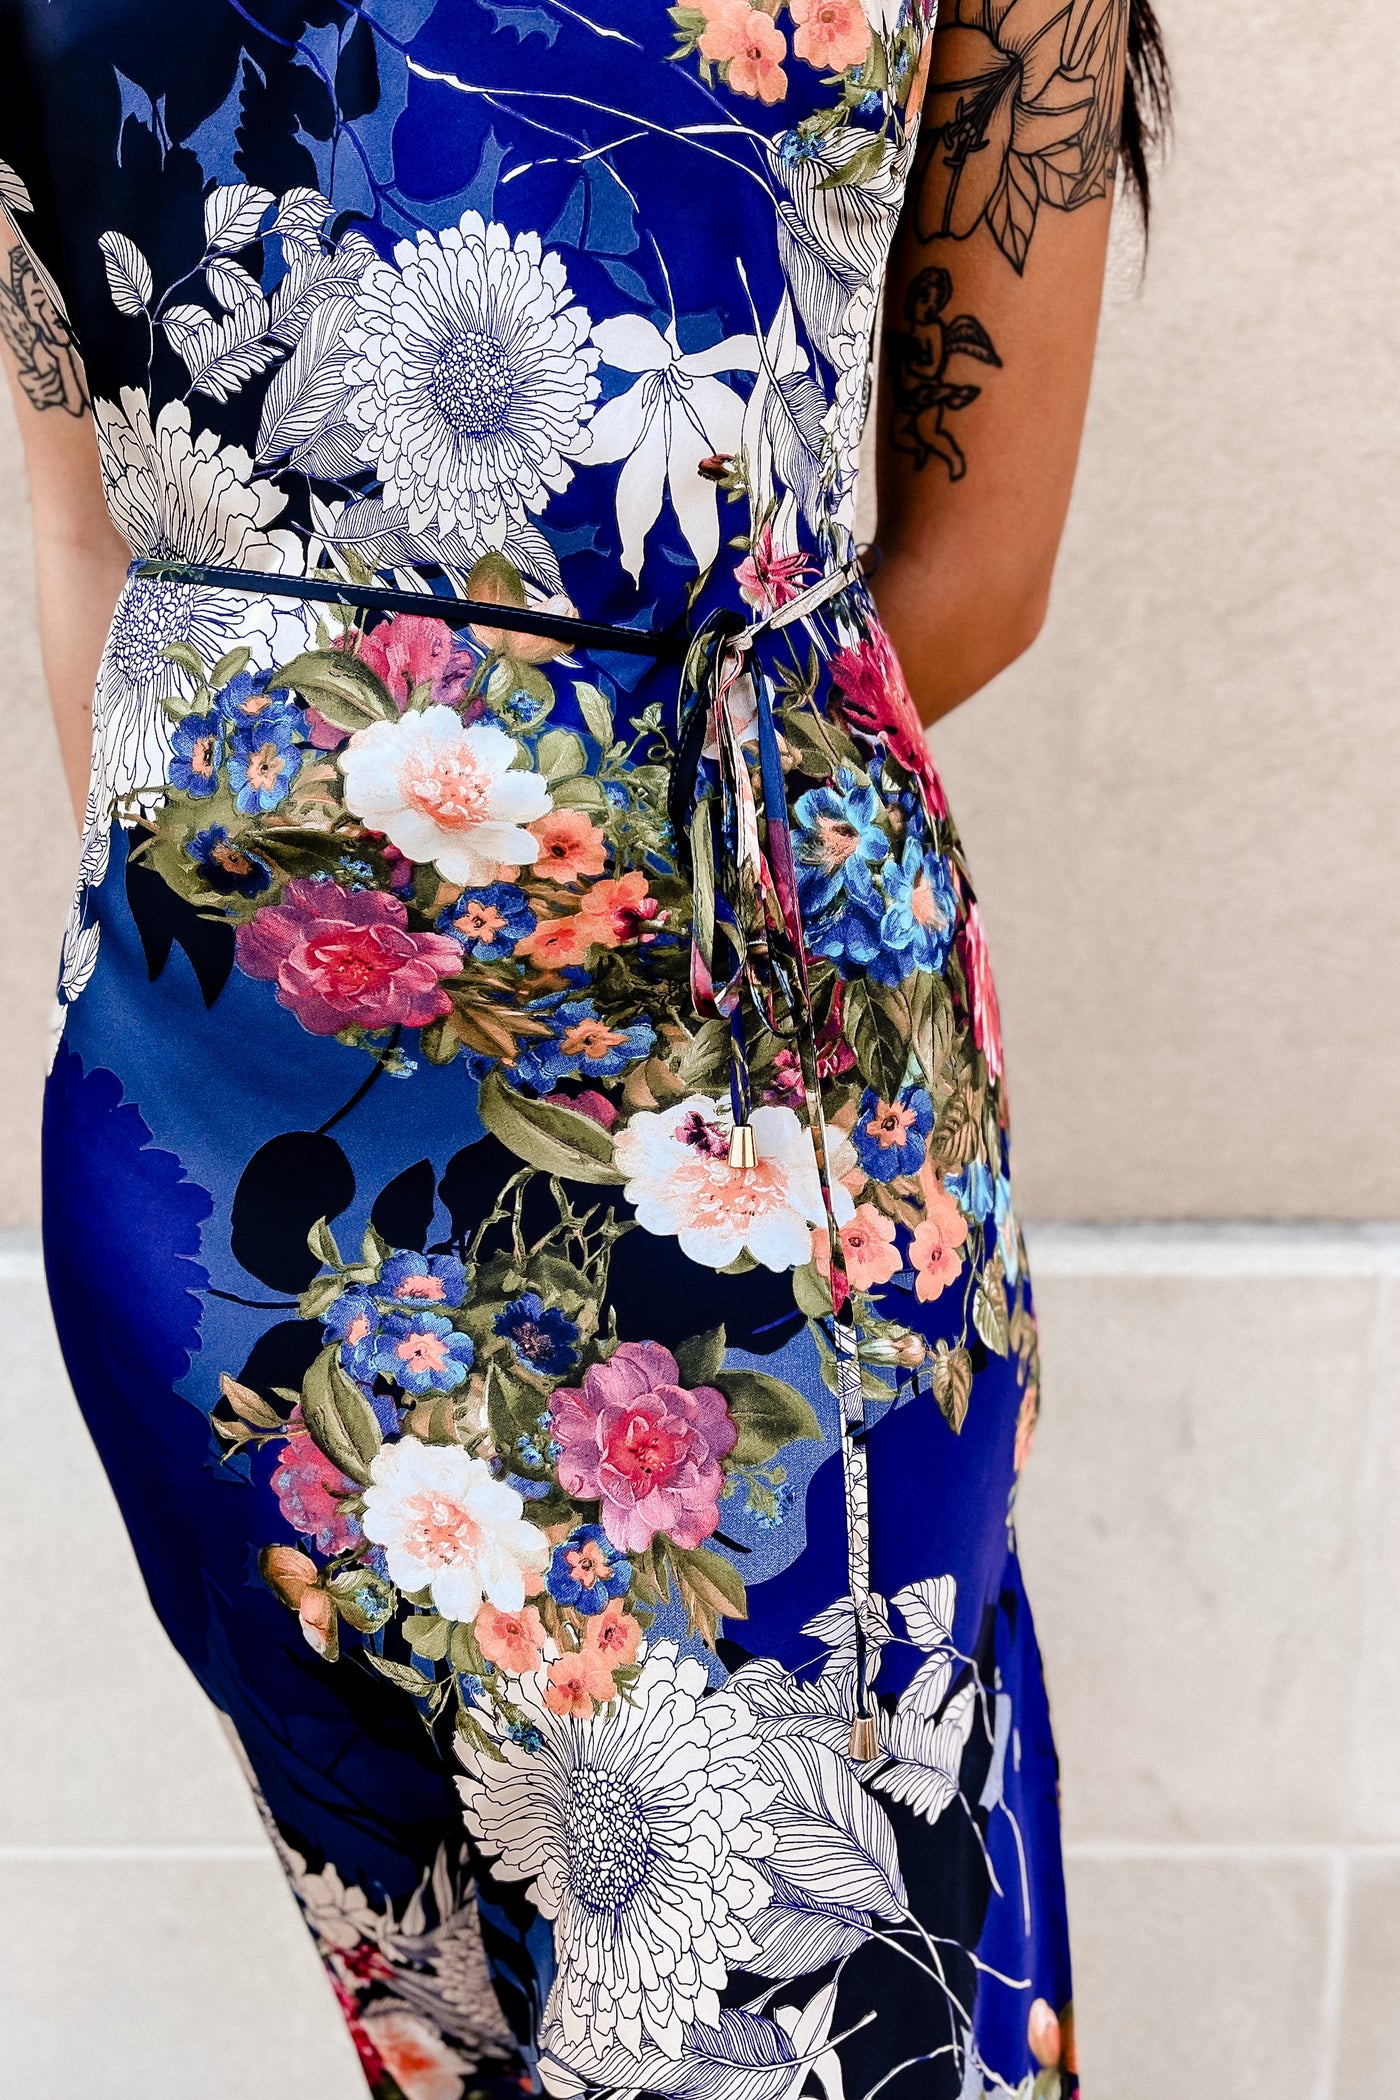 The Add A Little Spice Floral Slip Maxi Dress